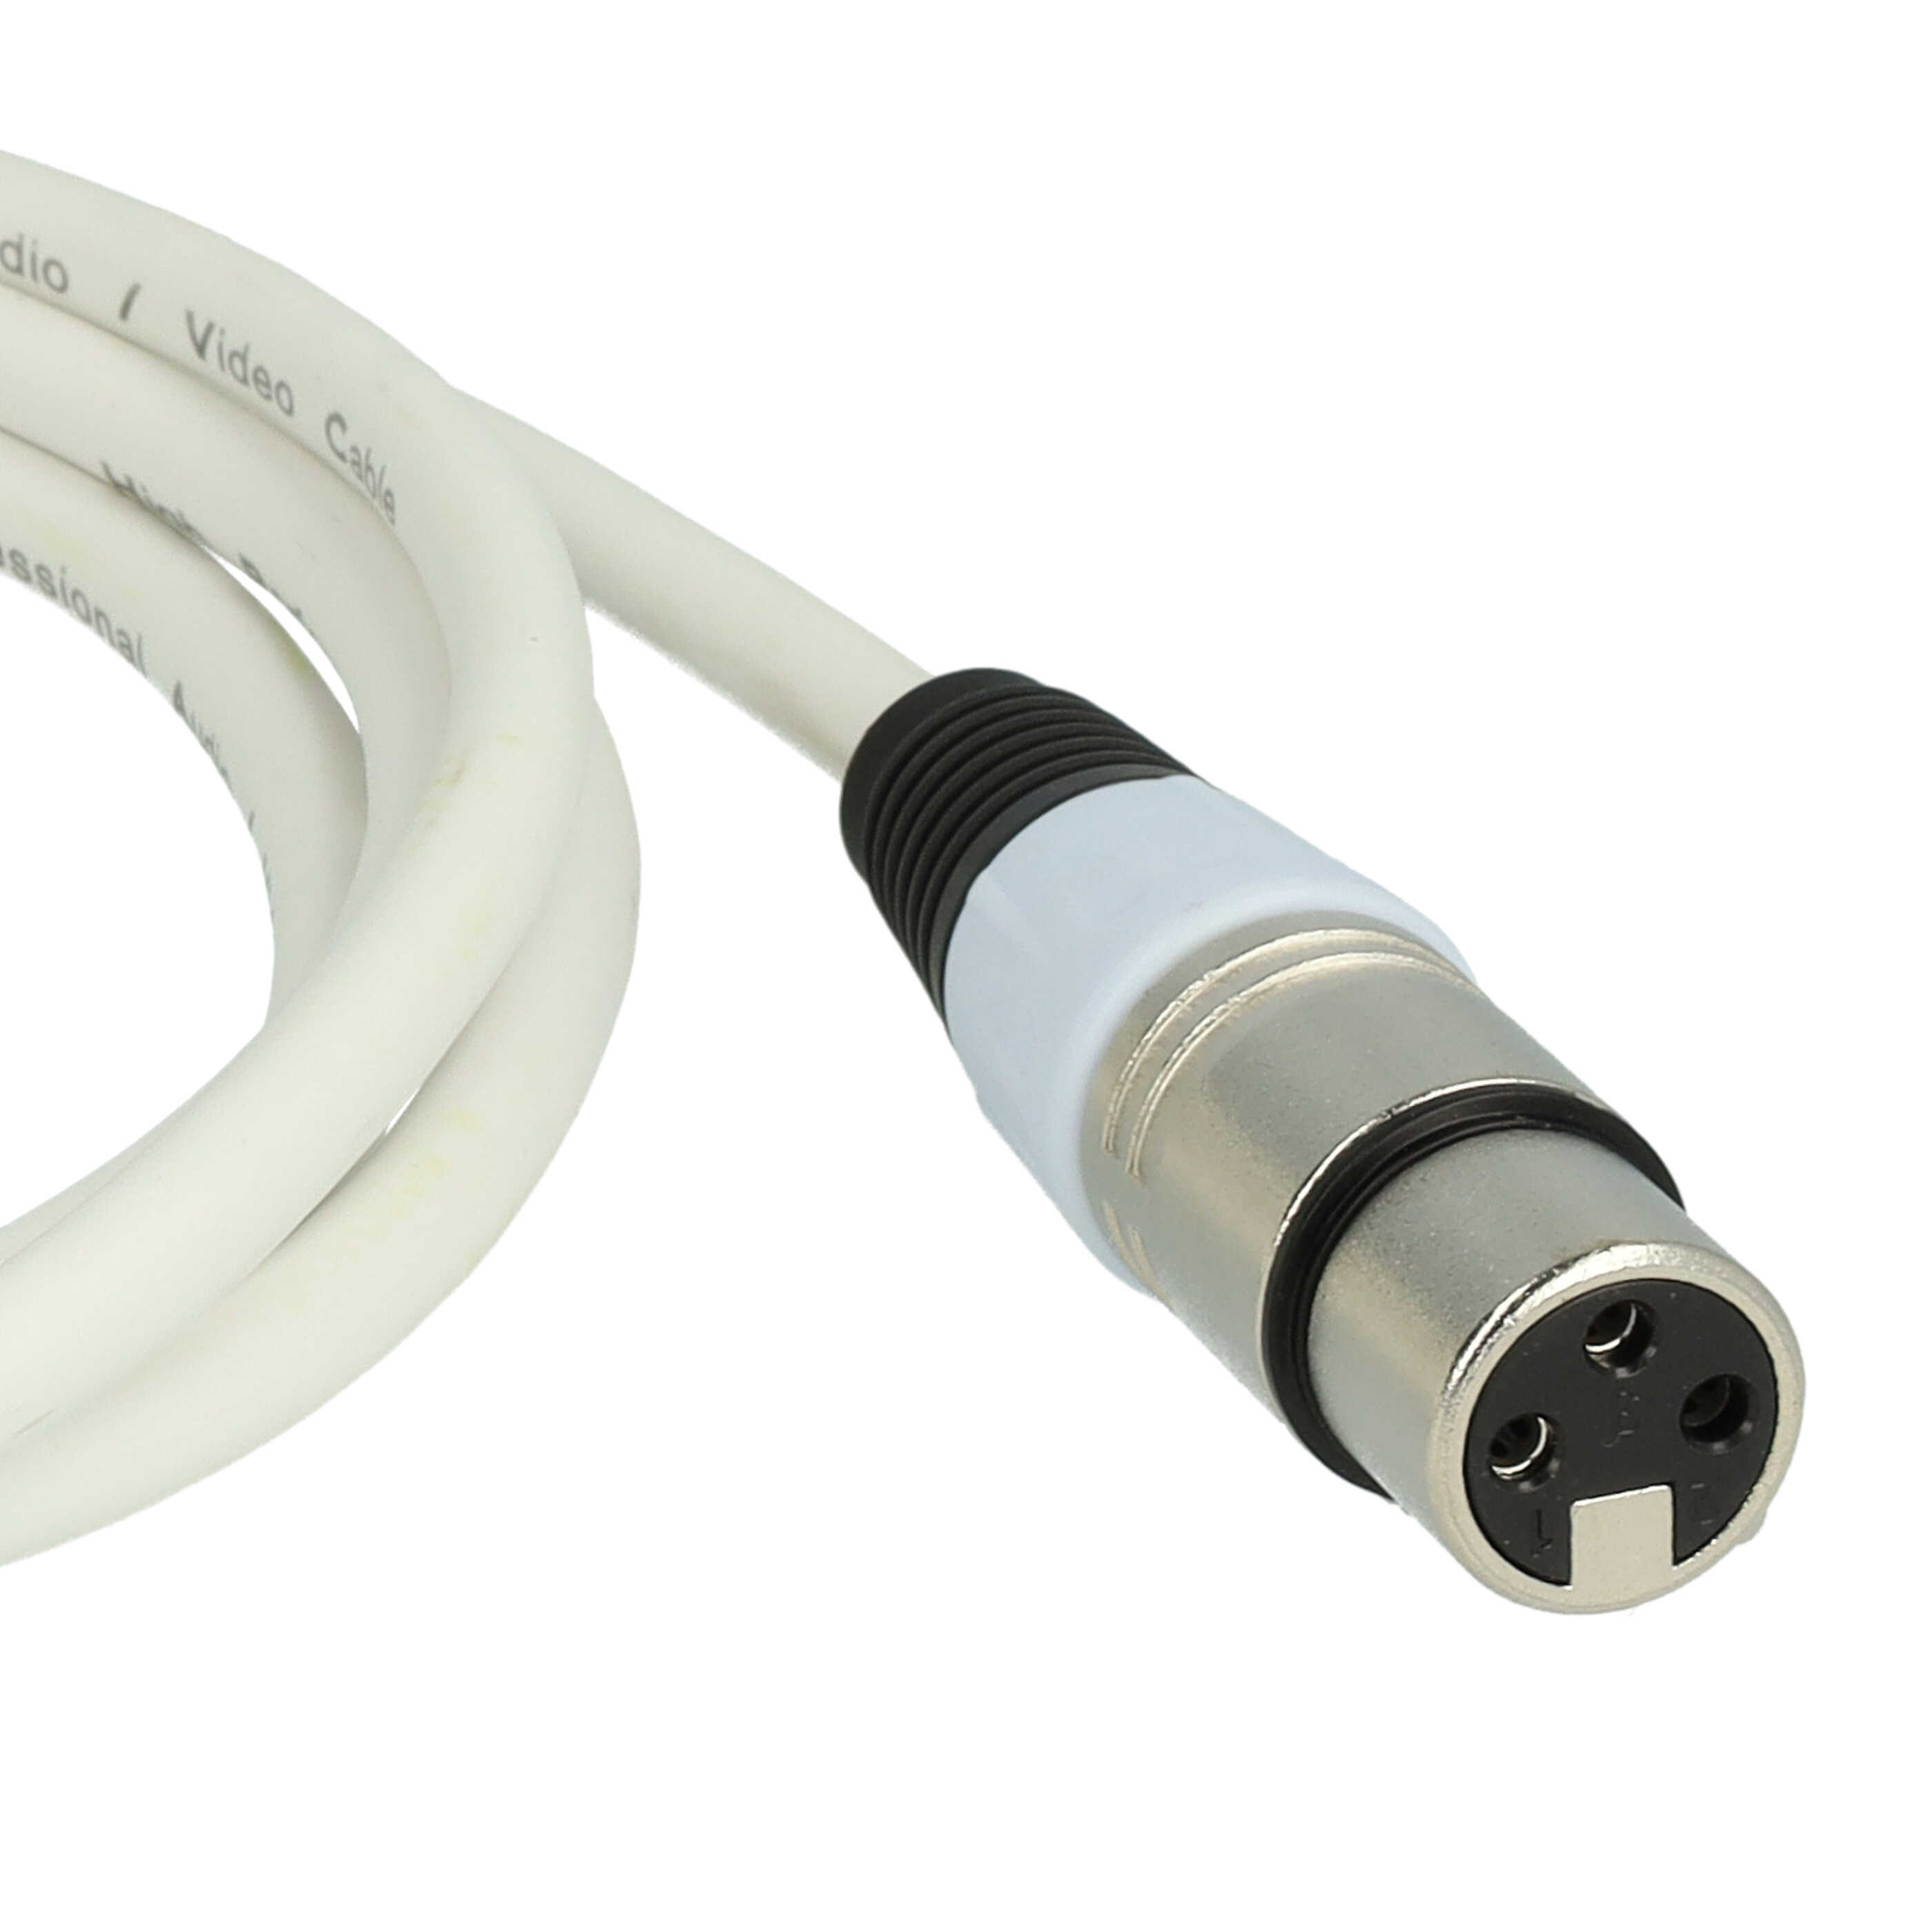 vhbw DMX Cable XLR Male Plug to XLR Female Socket compatible with Spotlights, Stage Lighting, Party Lights - 3